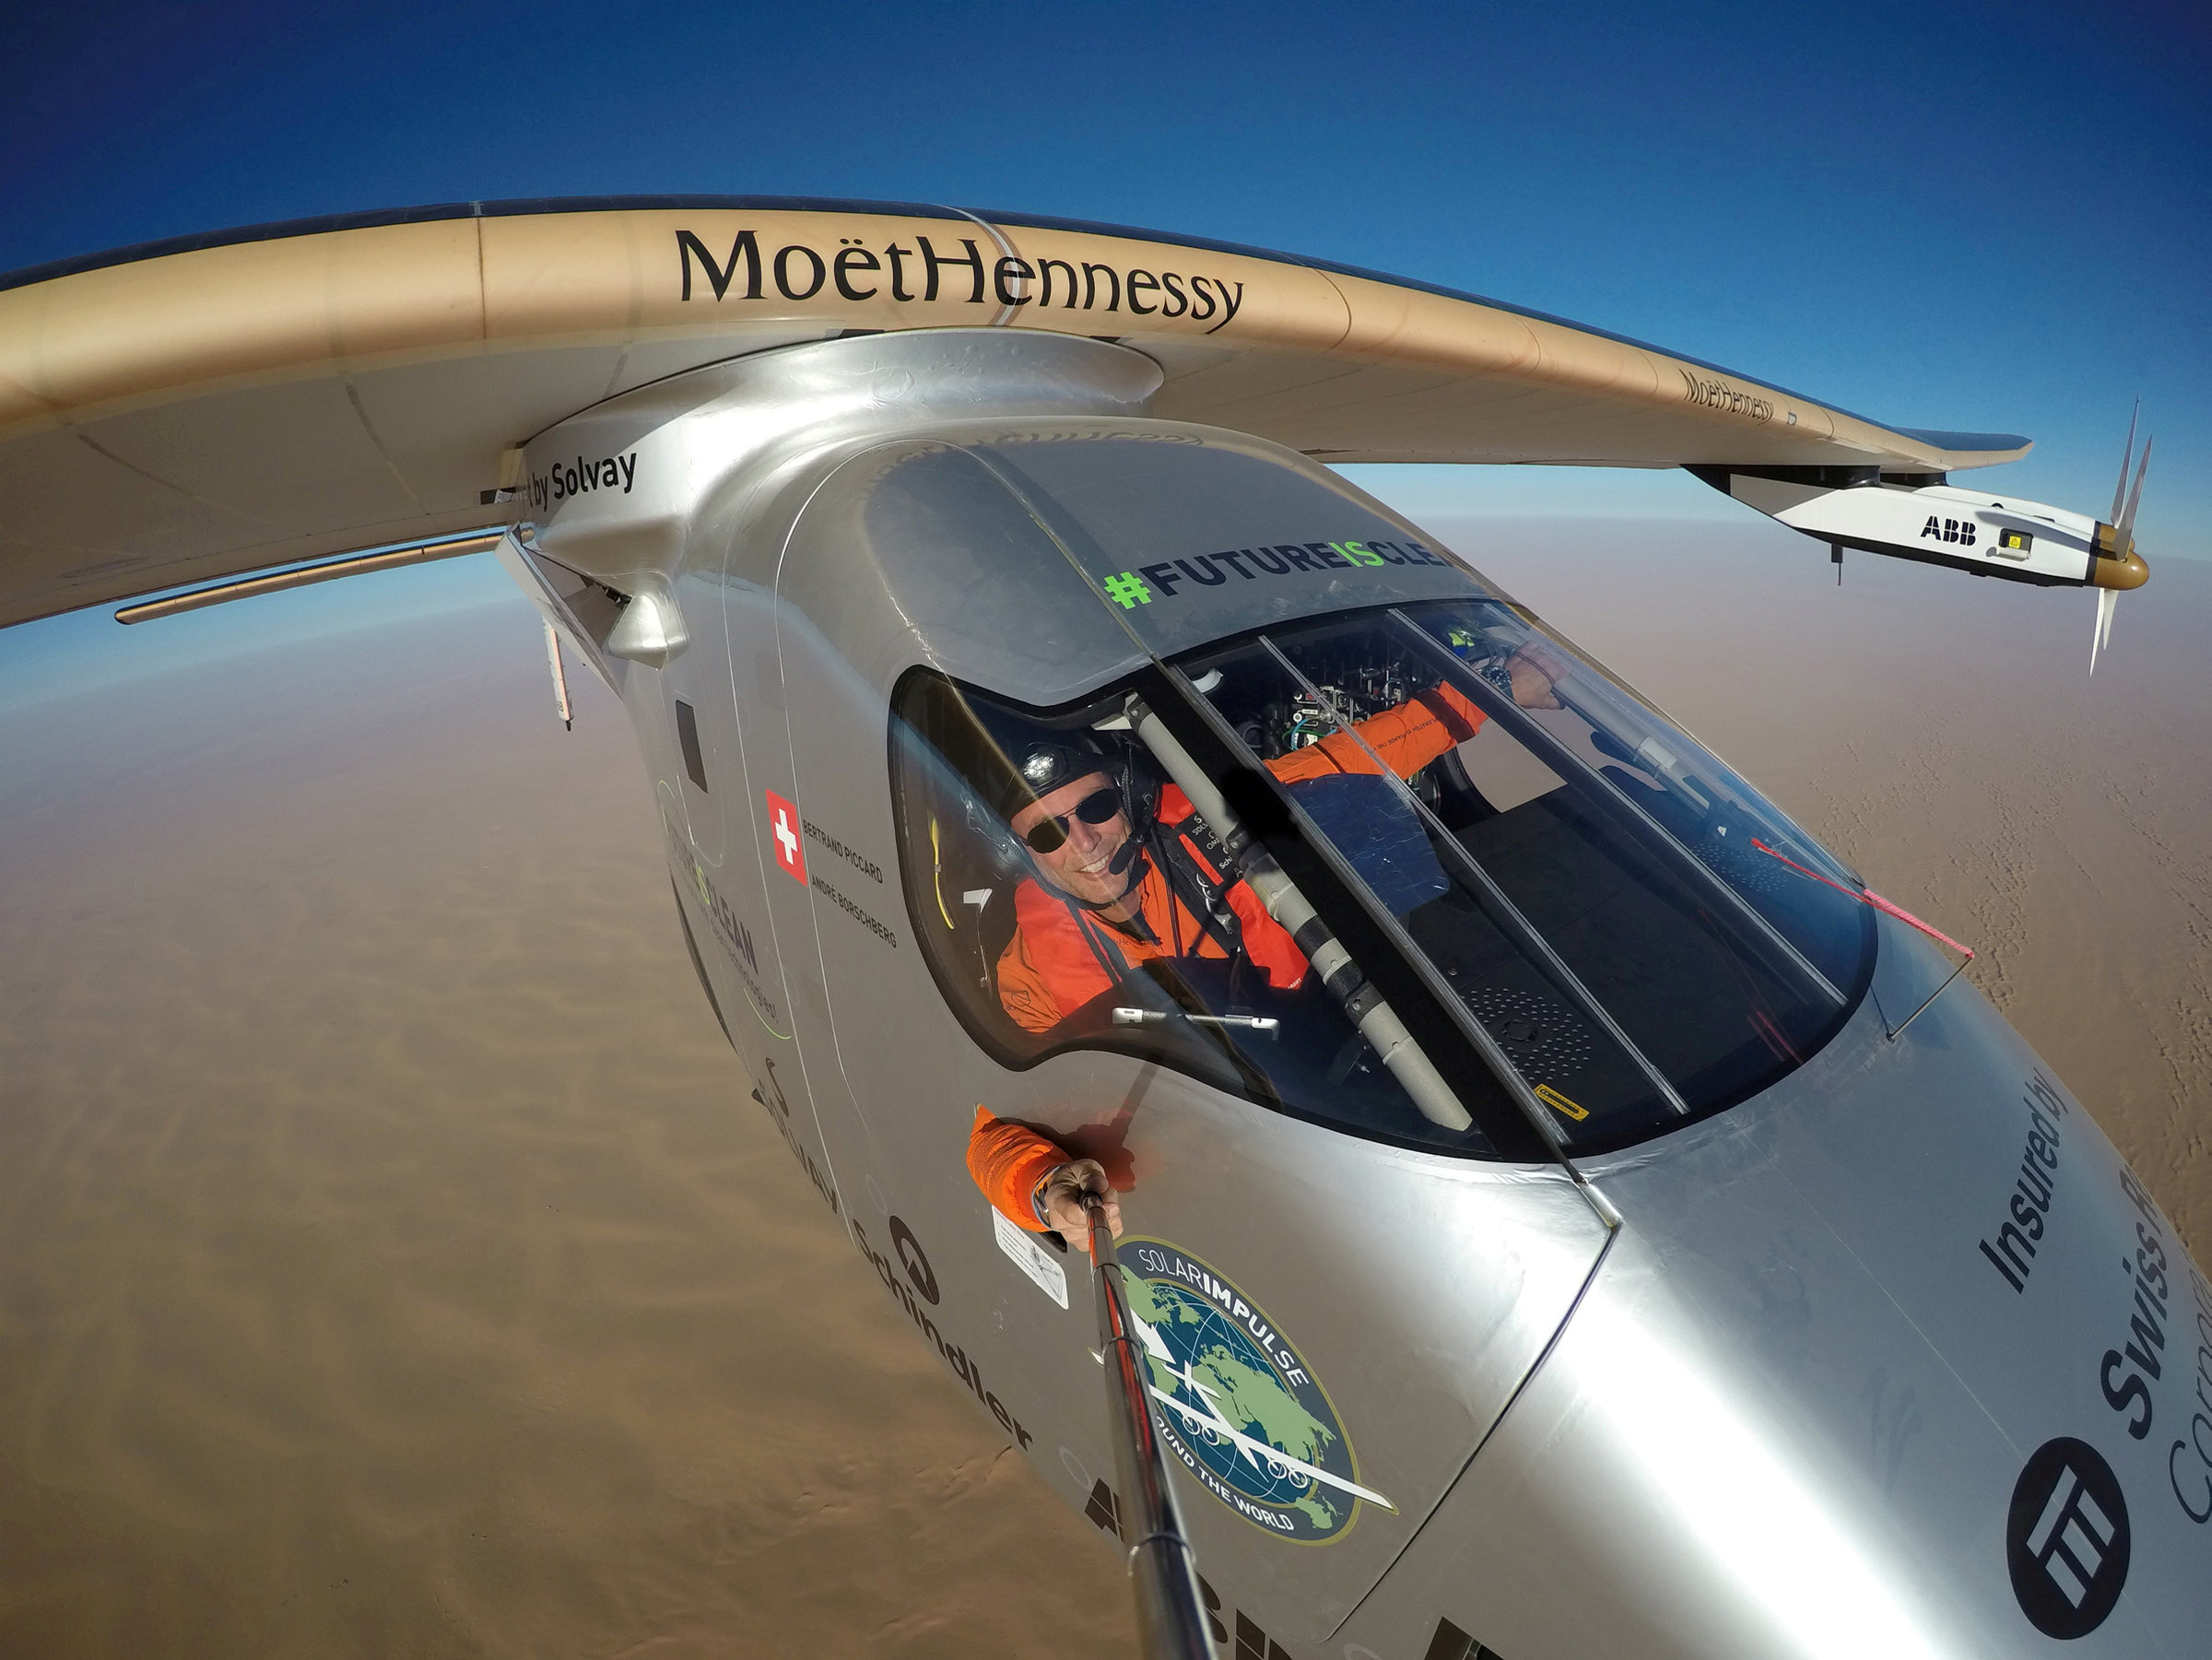 Selfie picture shows Swiss pioneer Bertrand Piccard during the last leg of the round the world trip with Solar Impulse 2 over the Arab peninsula